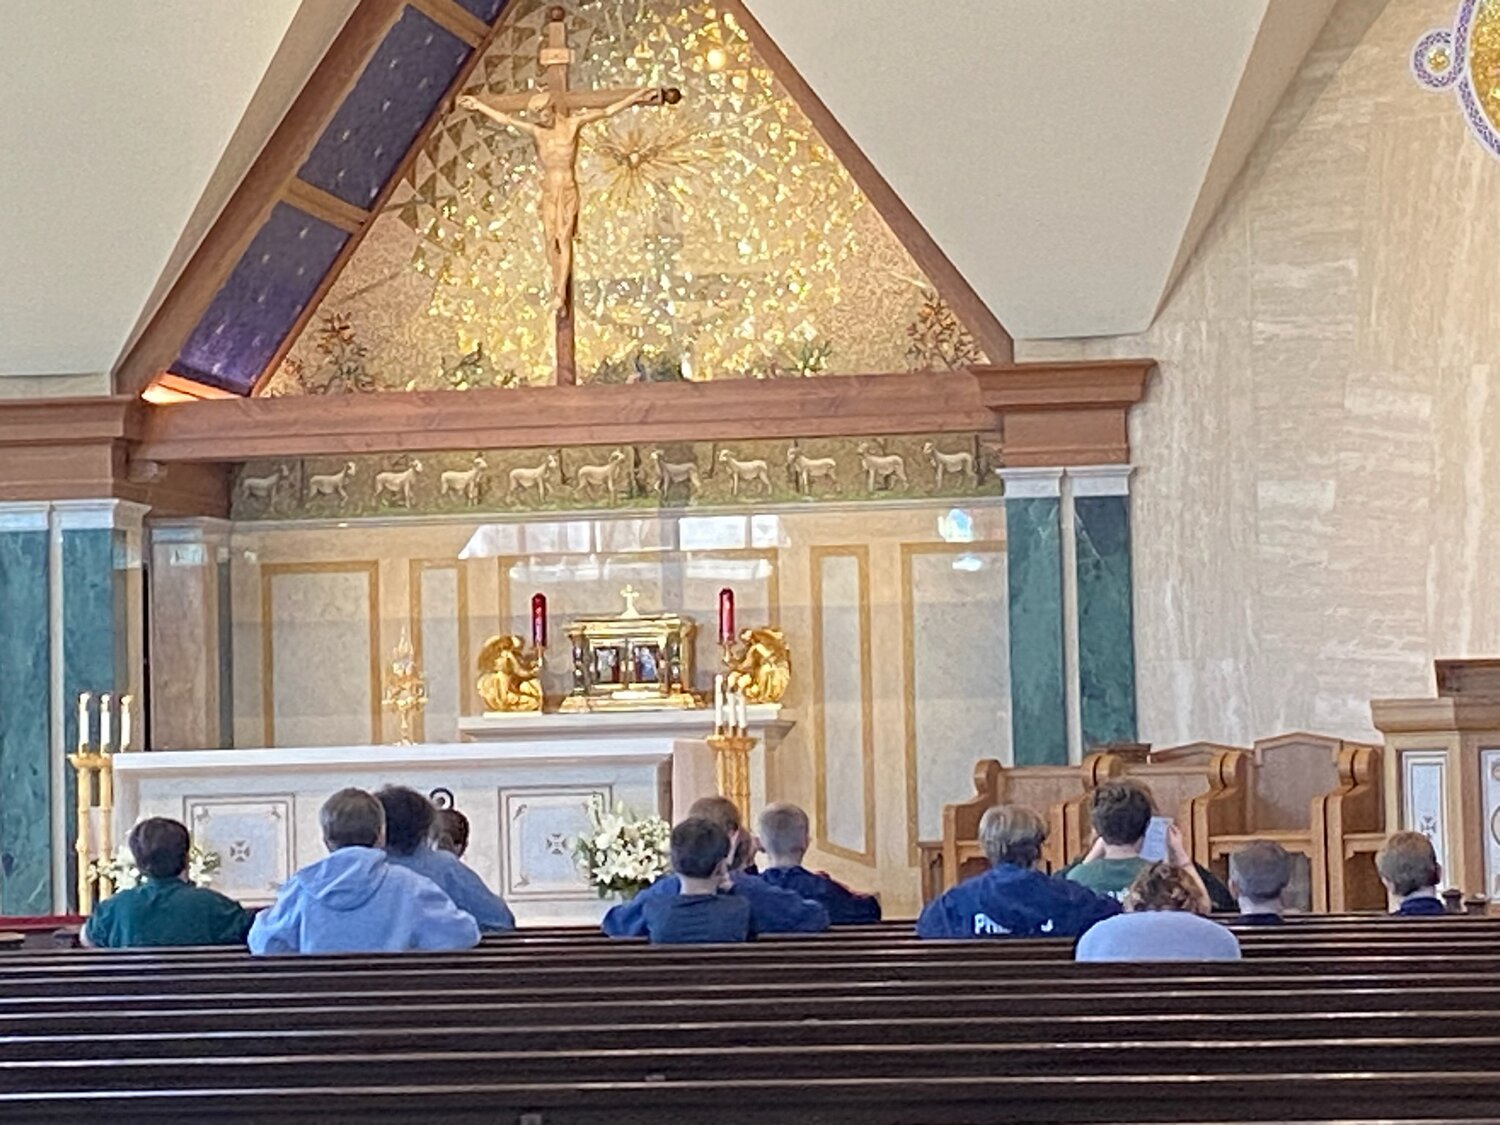 Students of St. Joseph Cathedral School in Jefferson City spend time in Adoration, praying for peace in the Cathedral during the Oct. 17 day of prayer and fasting for peace in the Holy Land.